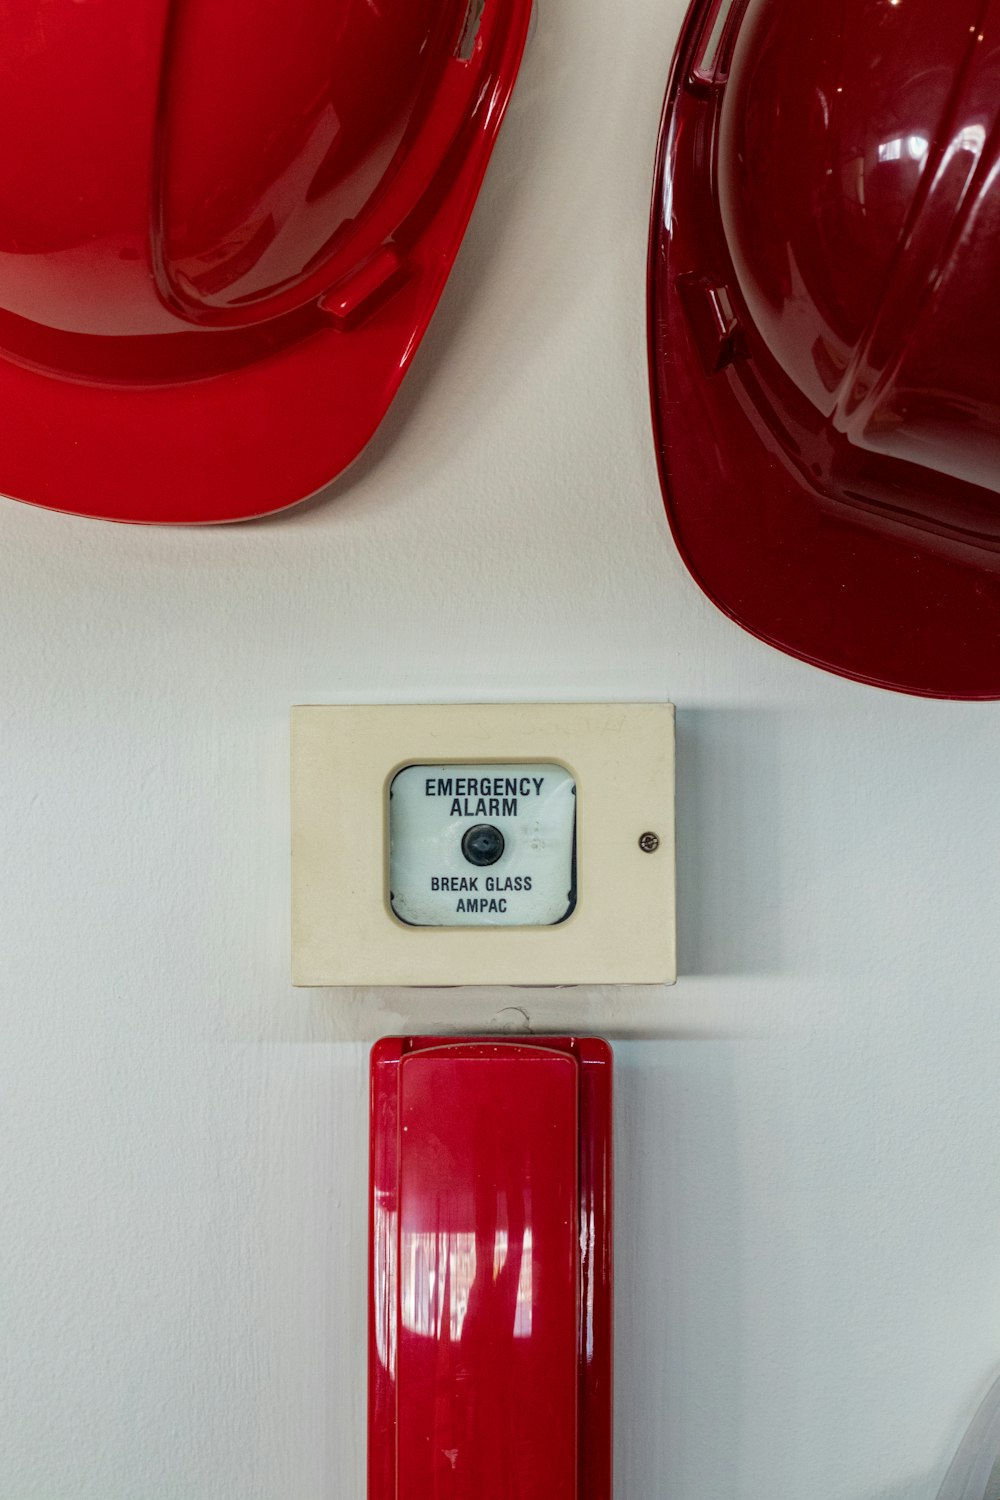 two red hard hats near emergency alarm button